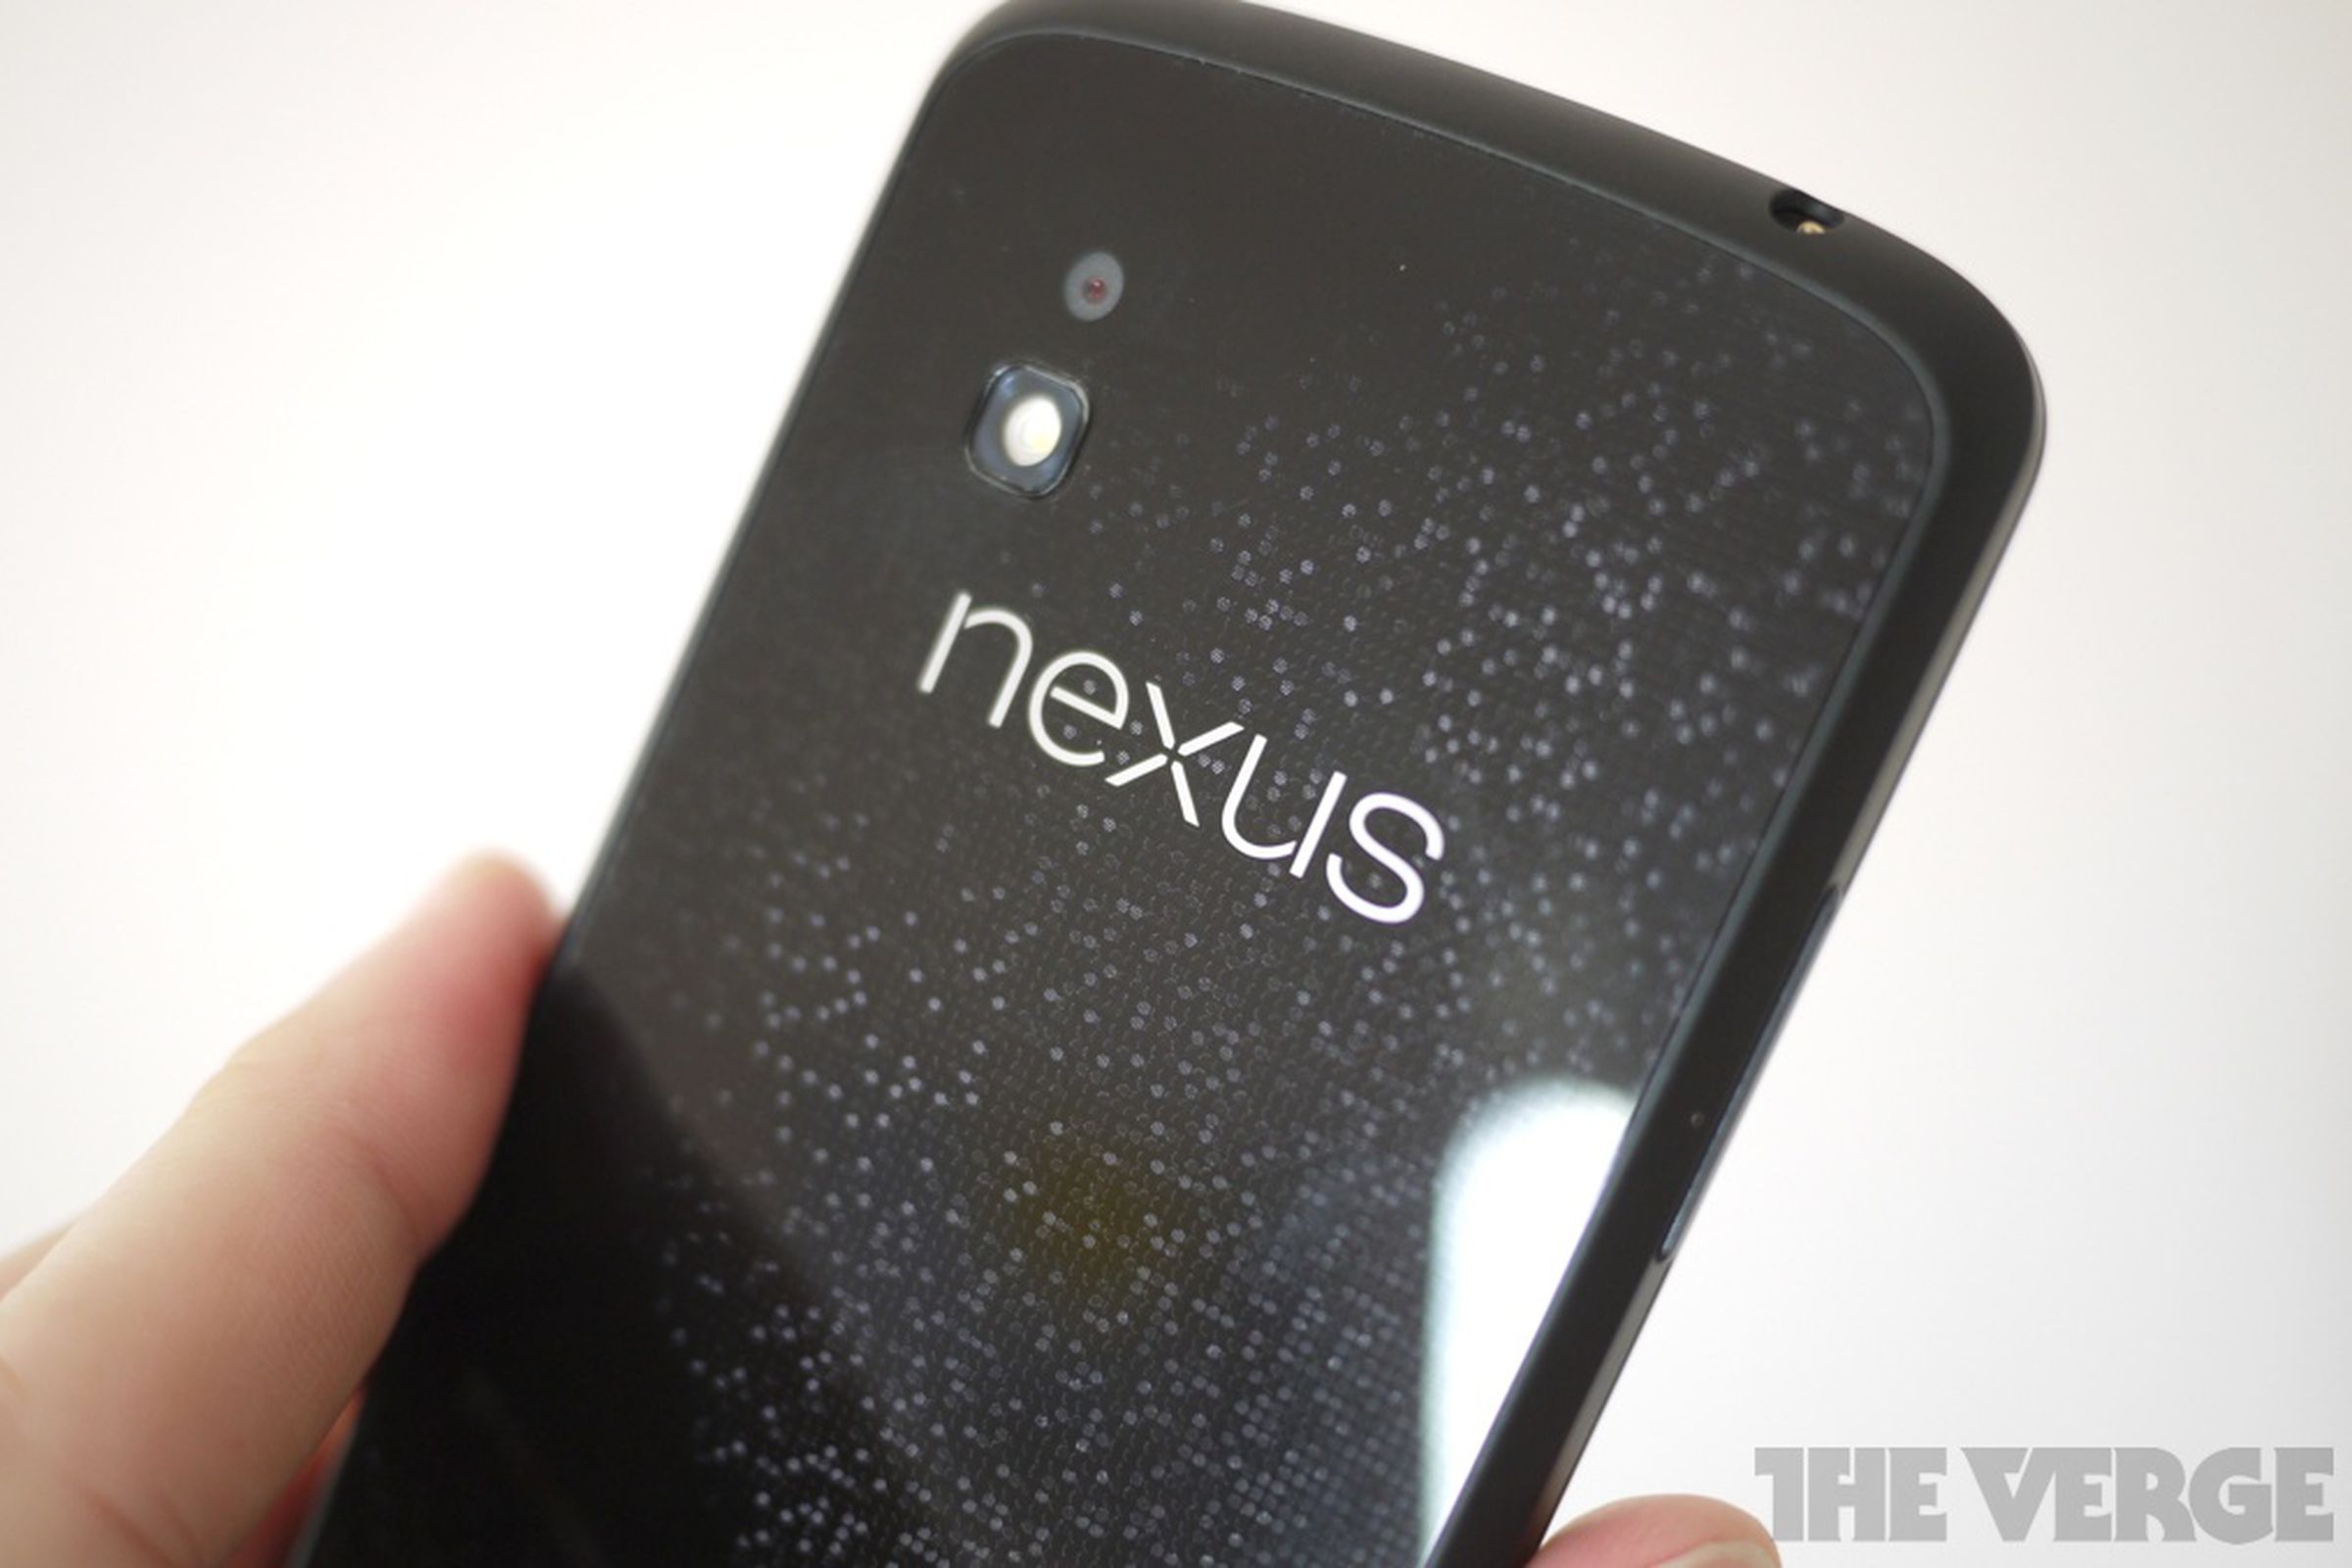 Gallery Photo: Hands-on with the Nexus 4